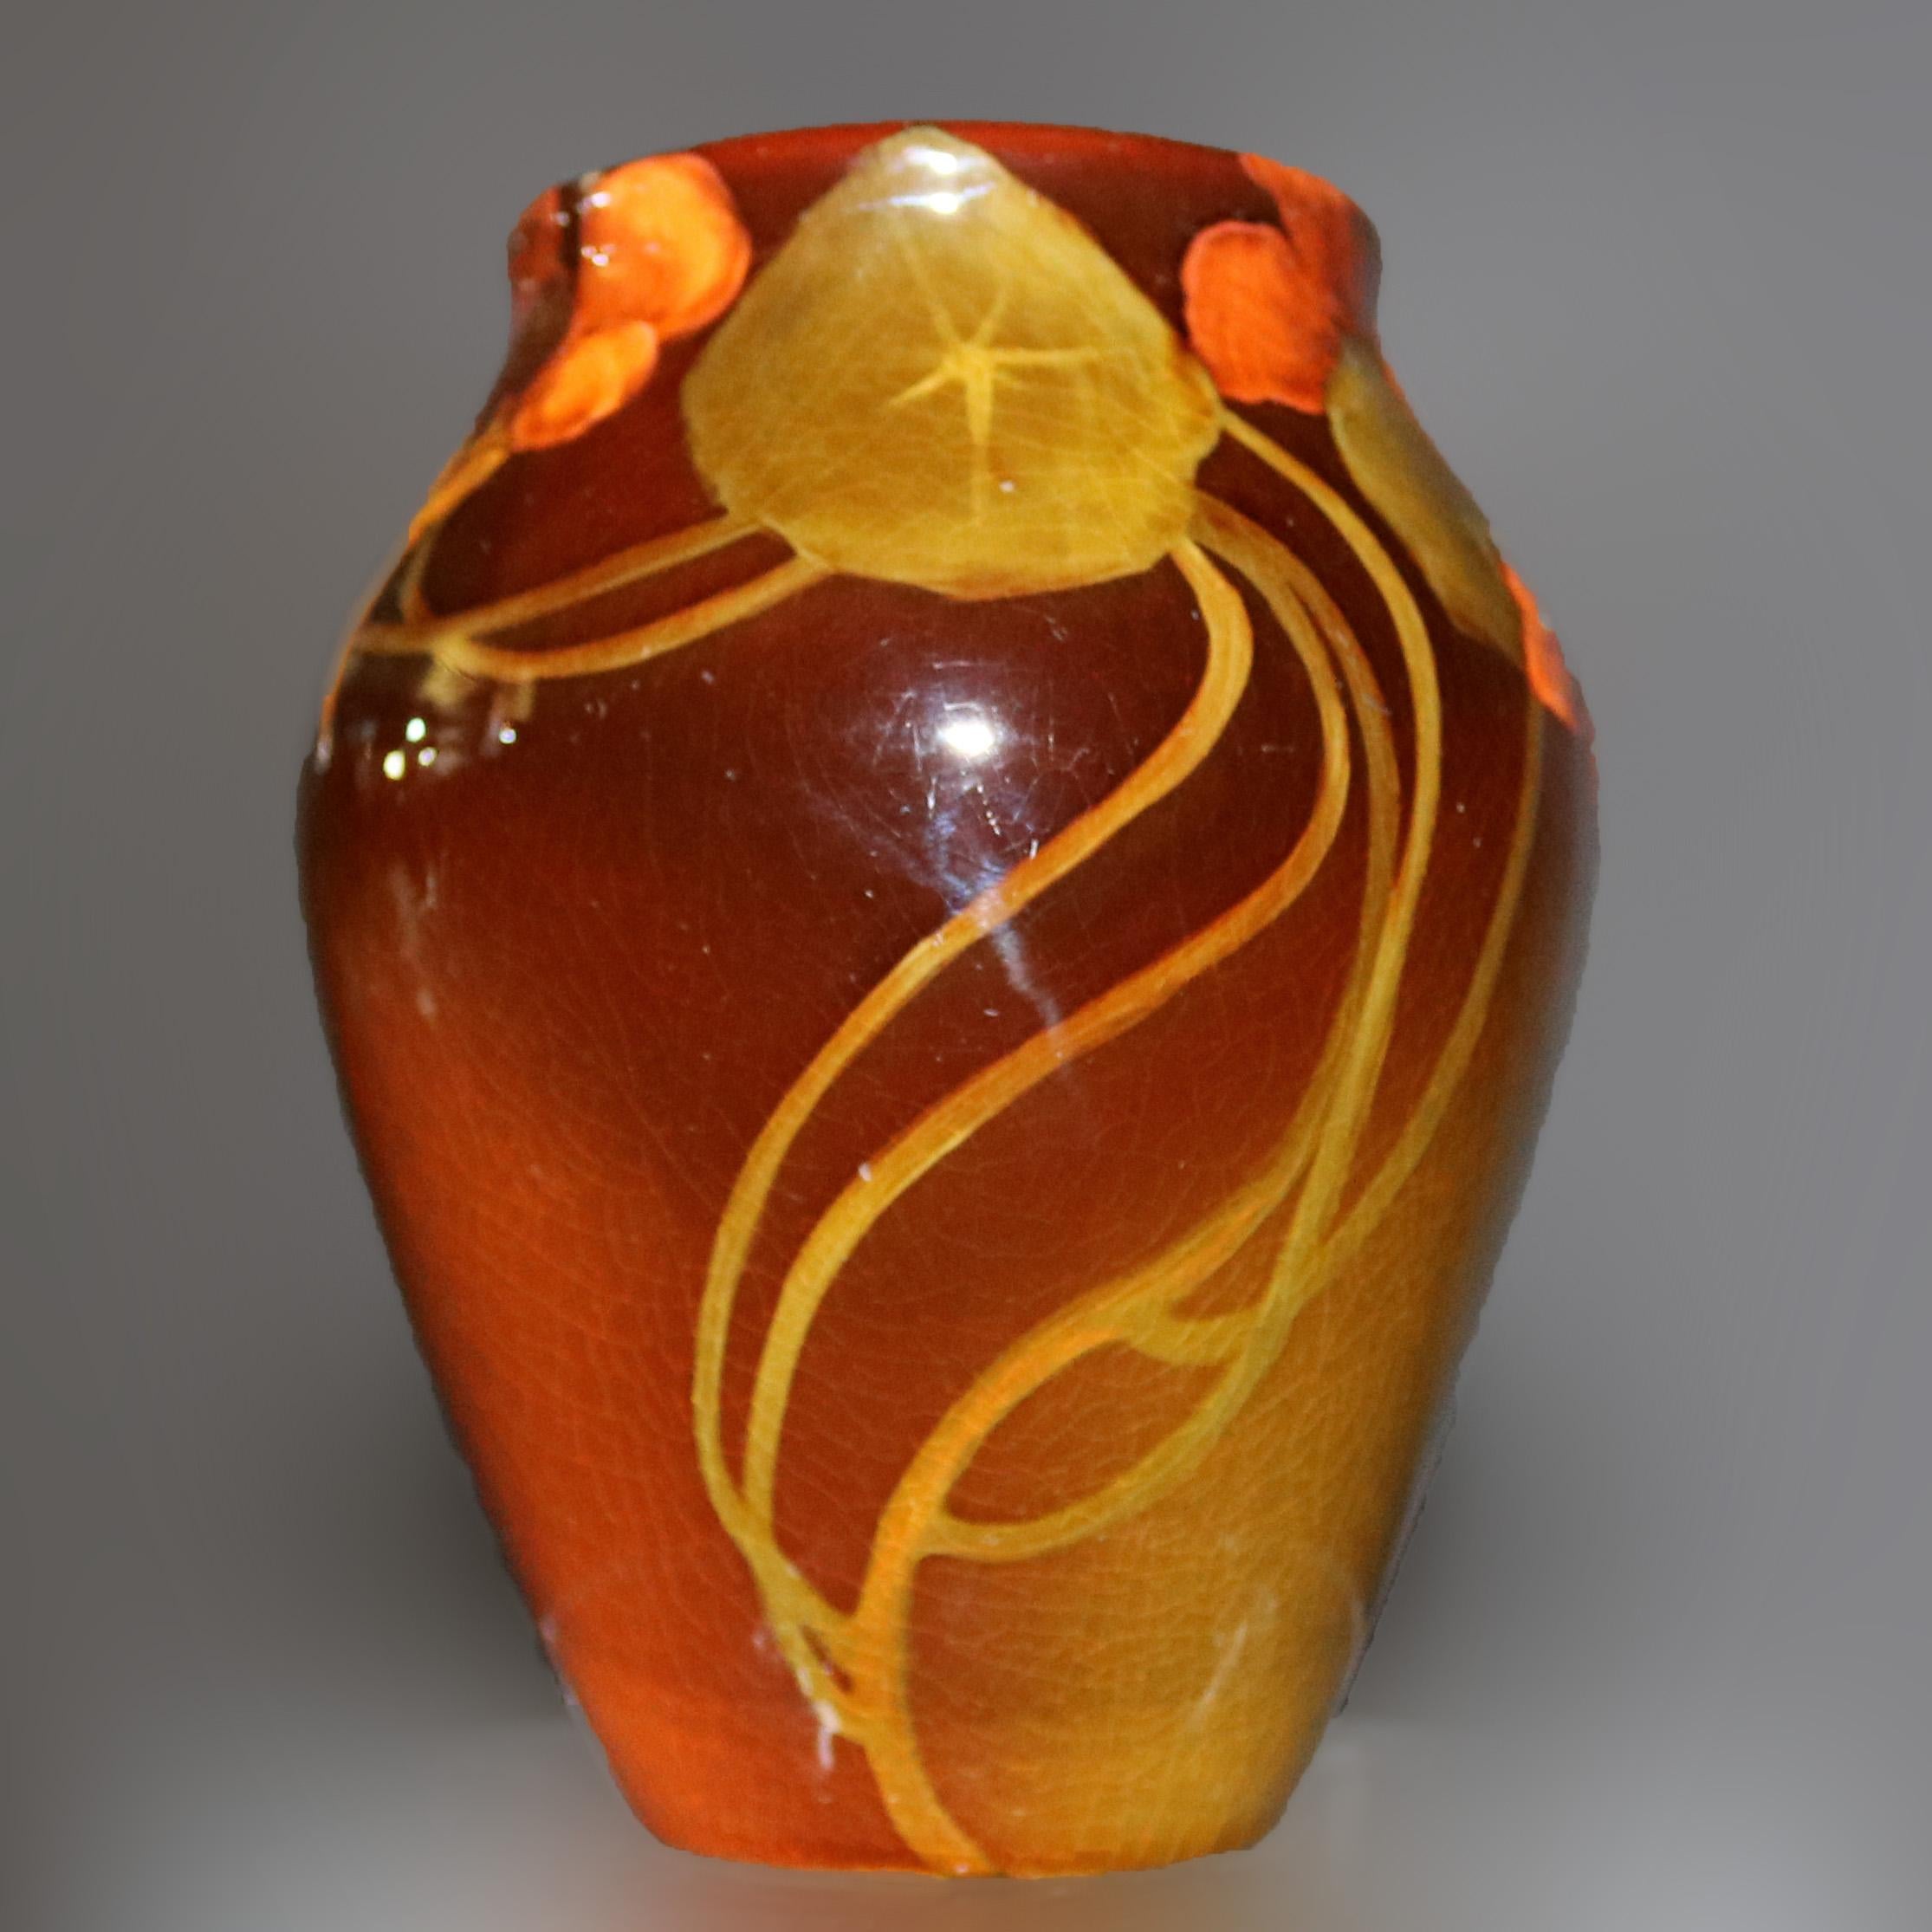 An antique artist-signed art pottery vase by Sallie Toohey of Rookwood offers standard glaze with floral decoration, maker stamp and artist signature on base, 1903

Measures: 5.5